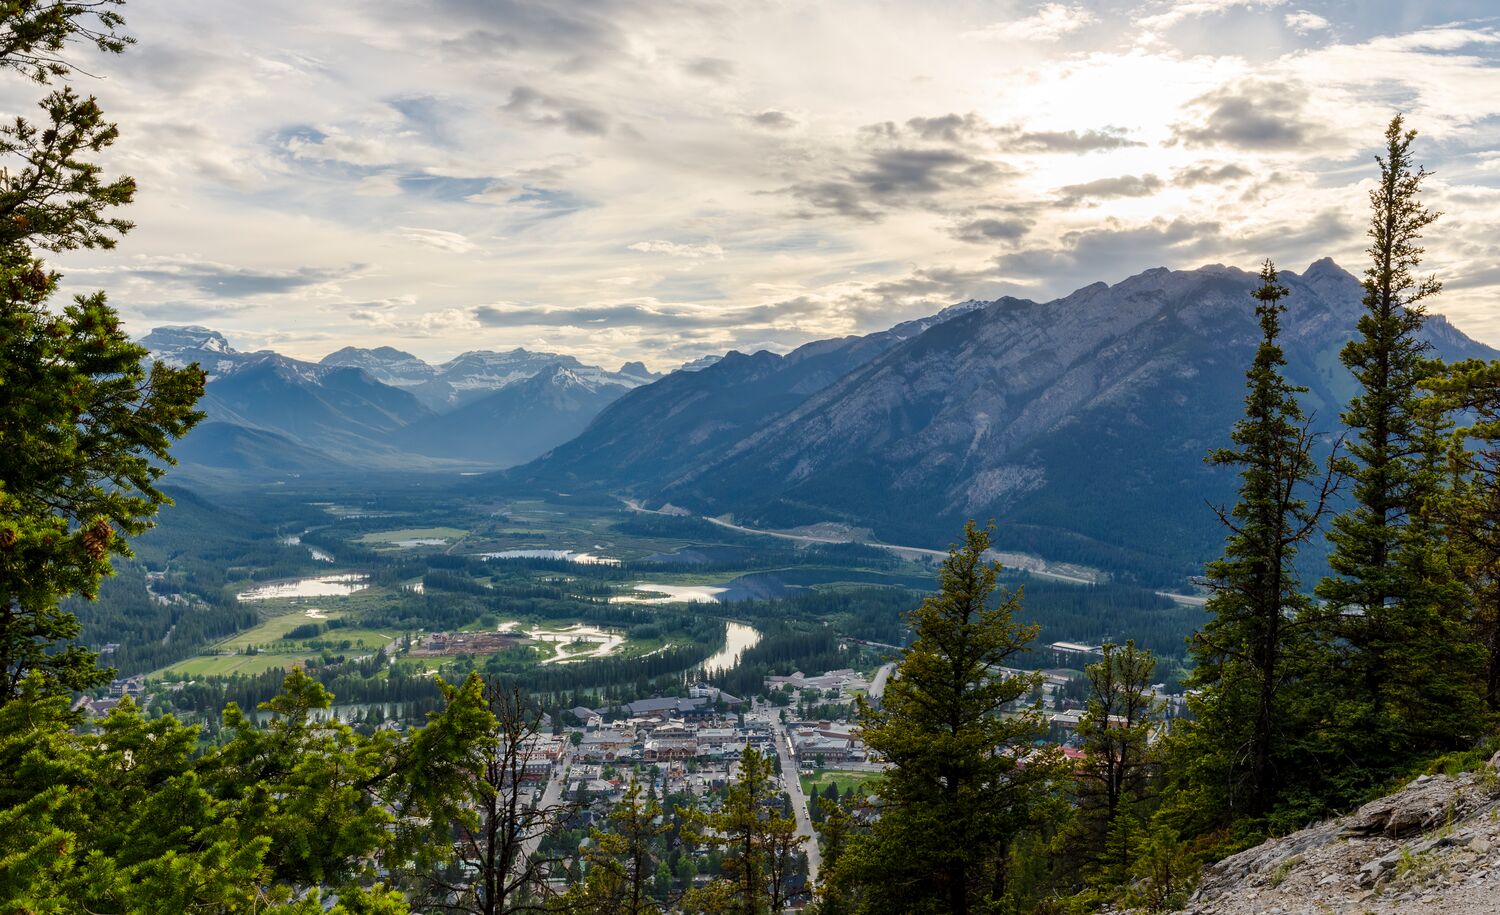 The view from the top of Tunnel Mountain in Banff, Alberta, Canada.